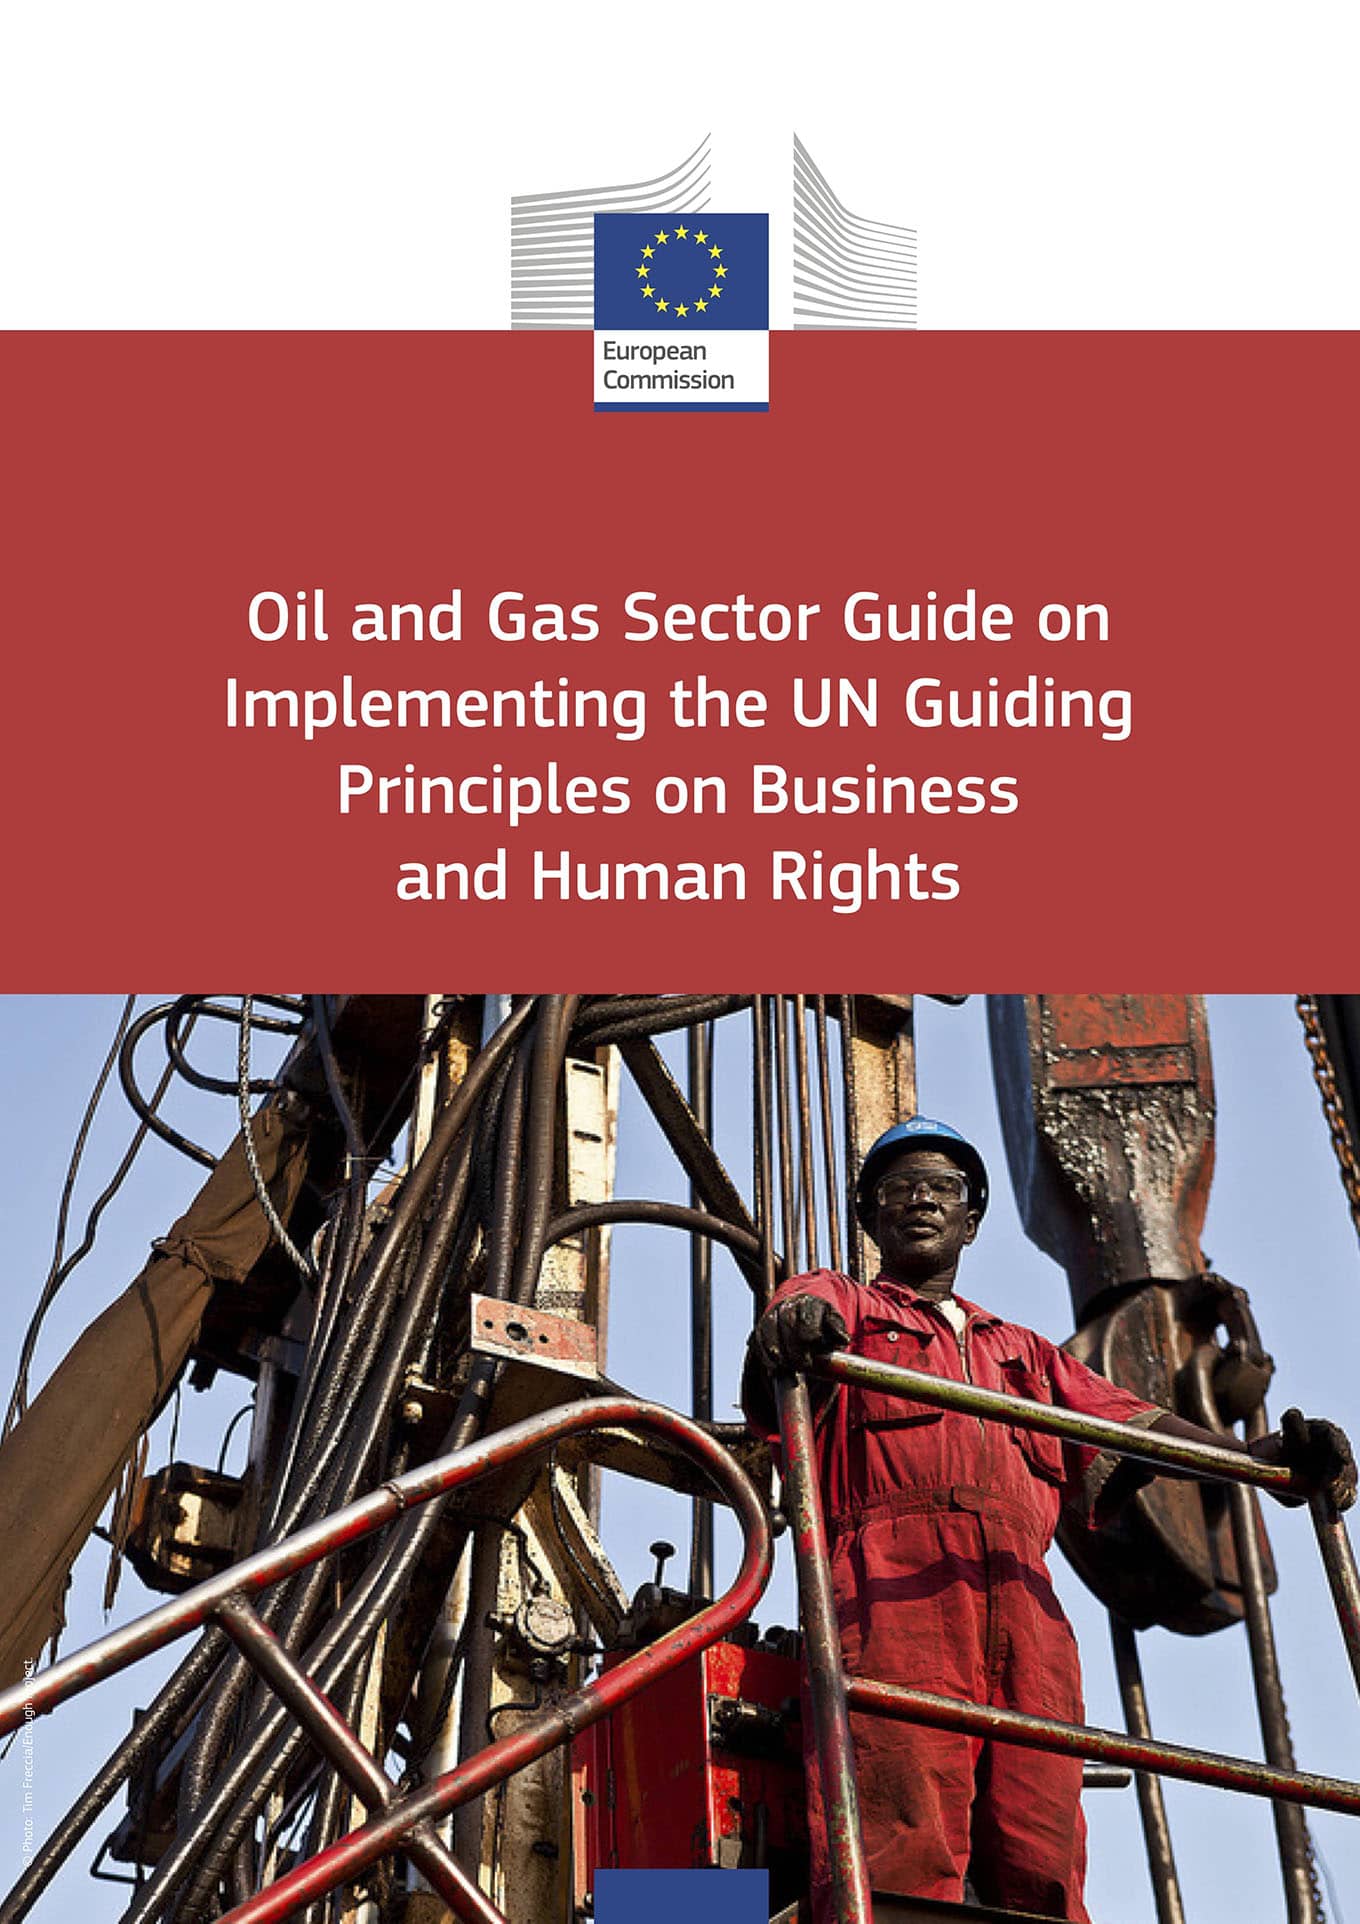 Oil and Gas Sector Guide on Implementing the UN Guiding Principles on Business and Human Rights (Shift and IHRB, 2013)